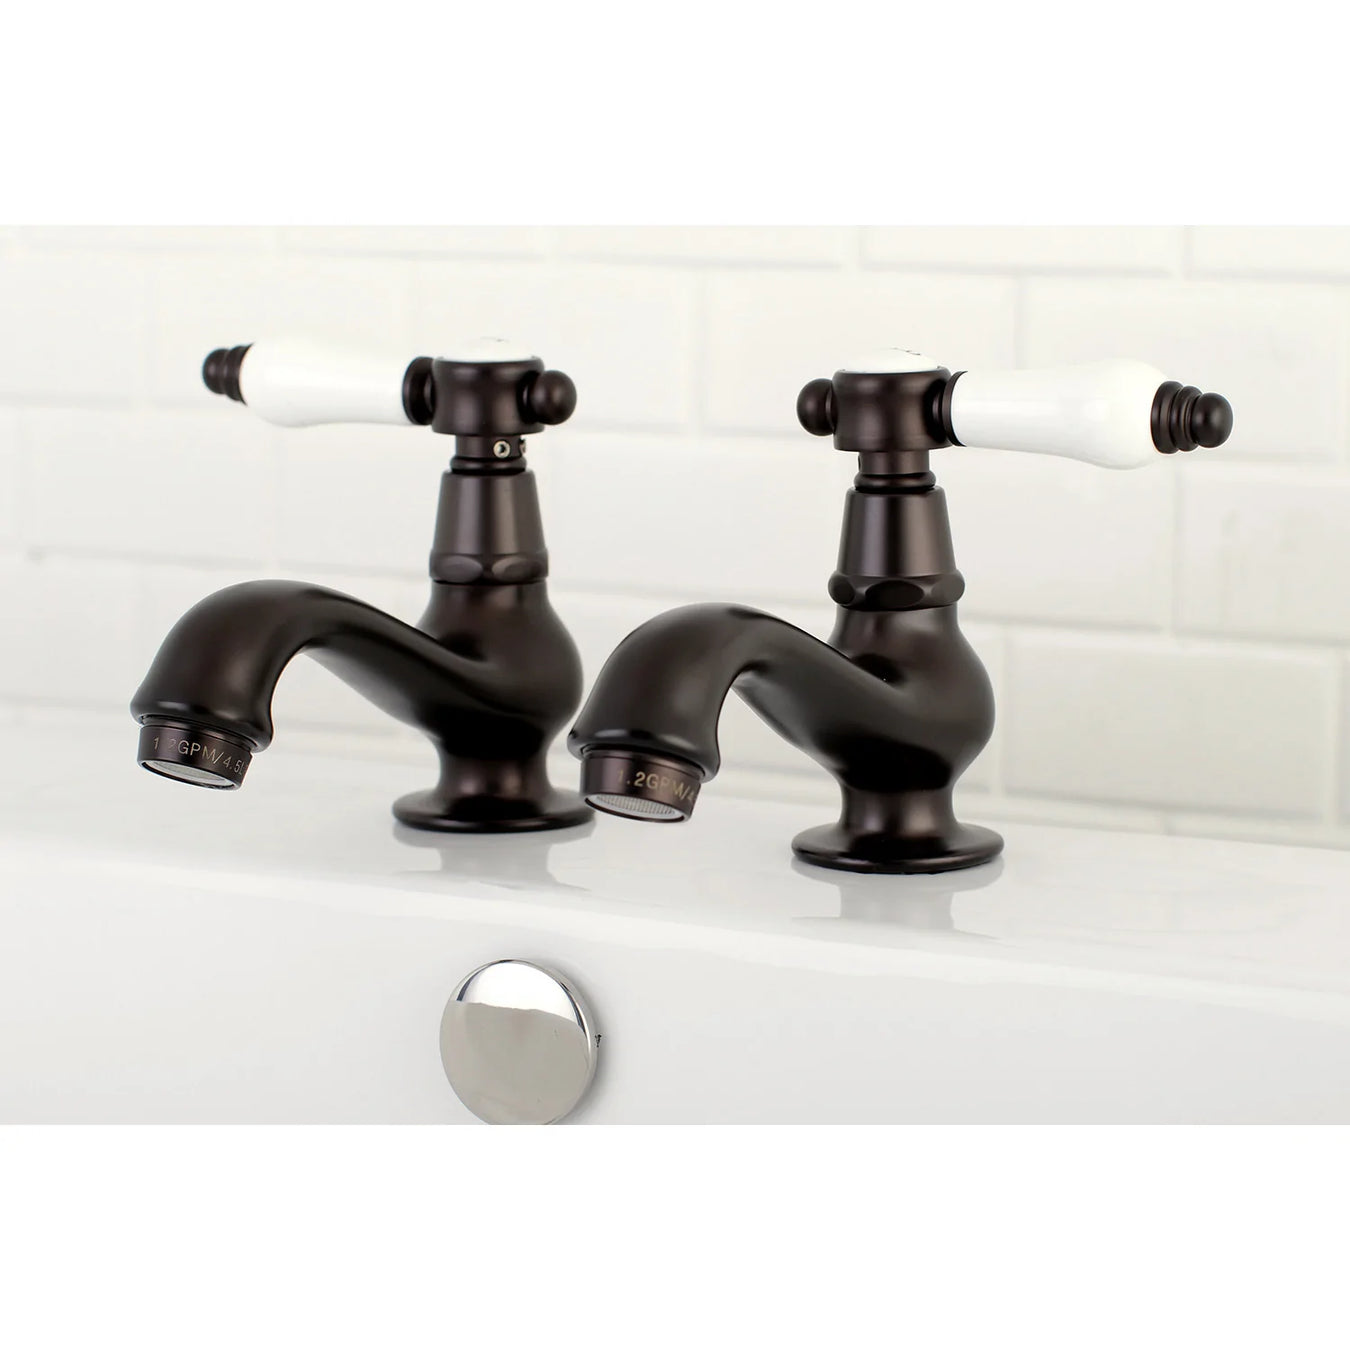 Kingston Brass Old Style Vintage Basin Tap Faucets